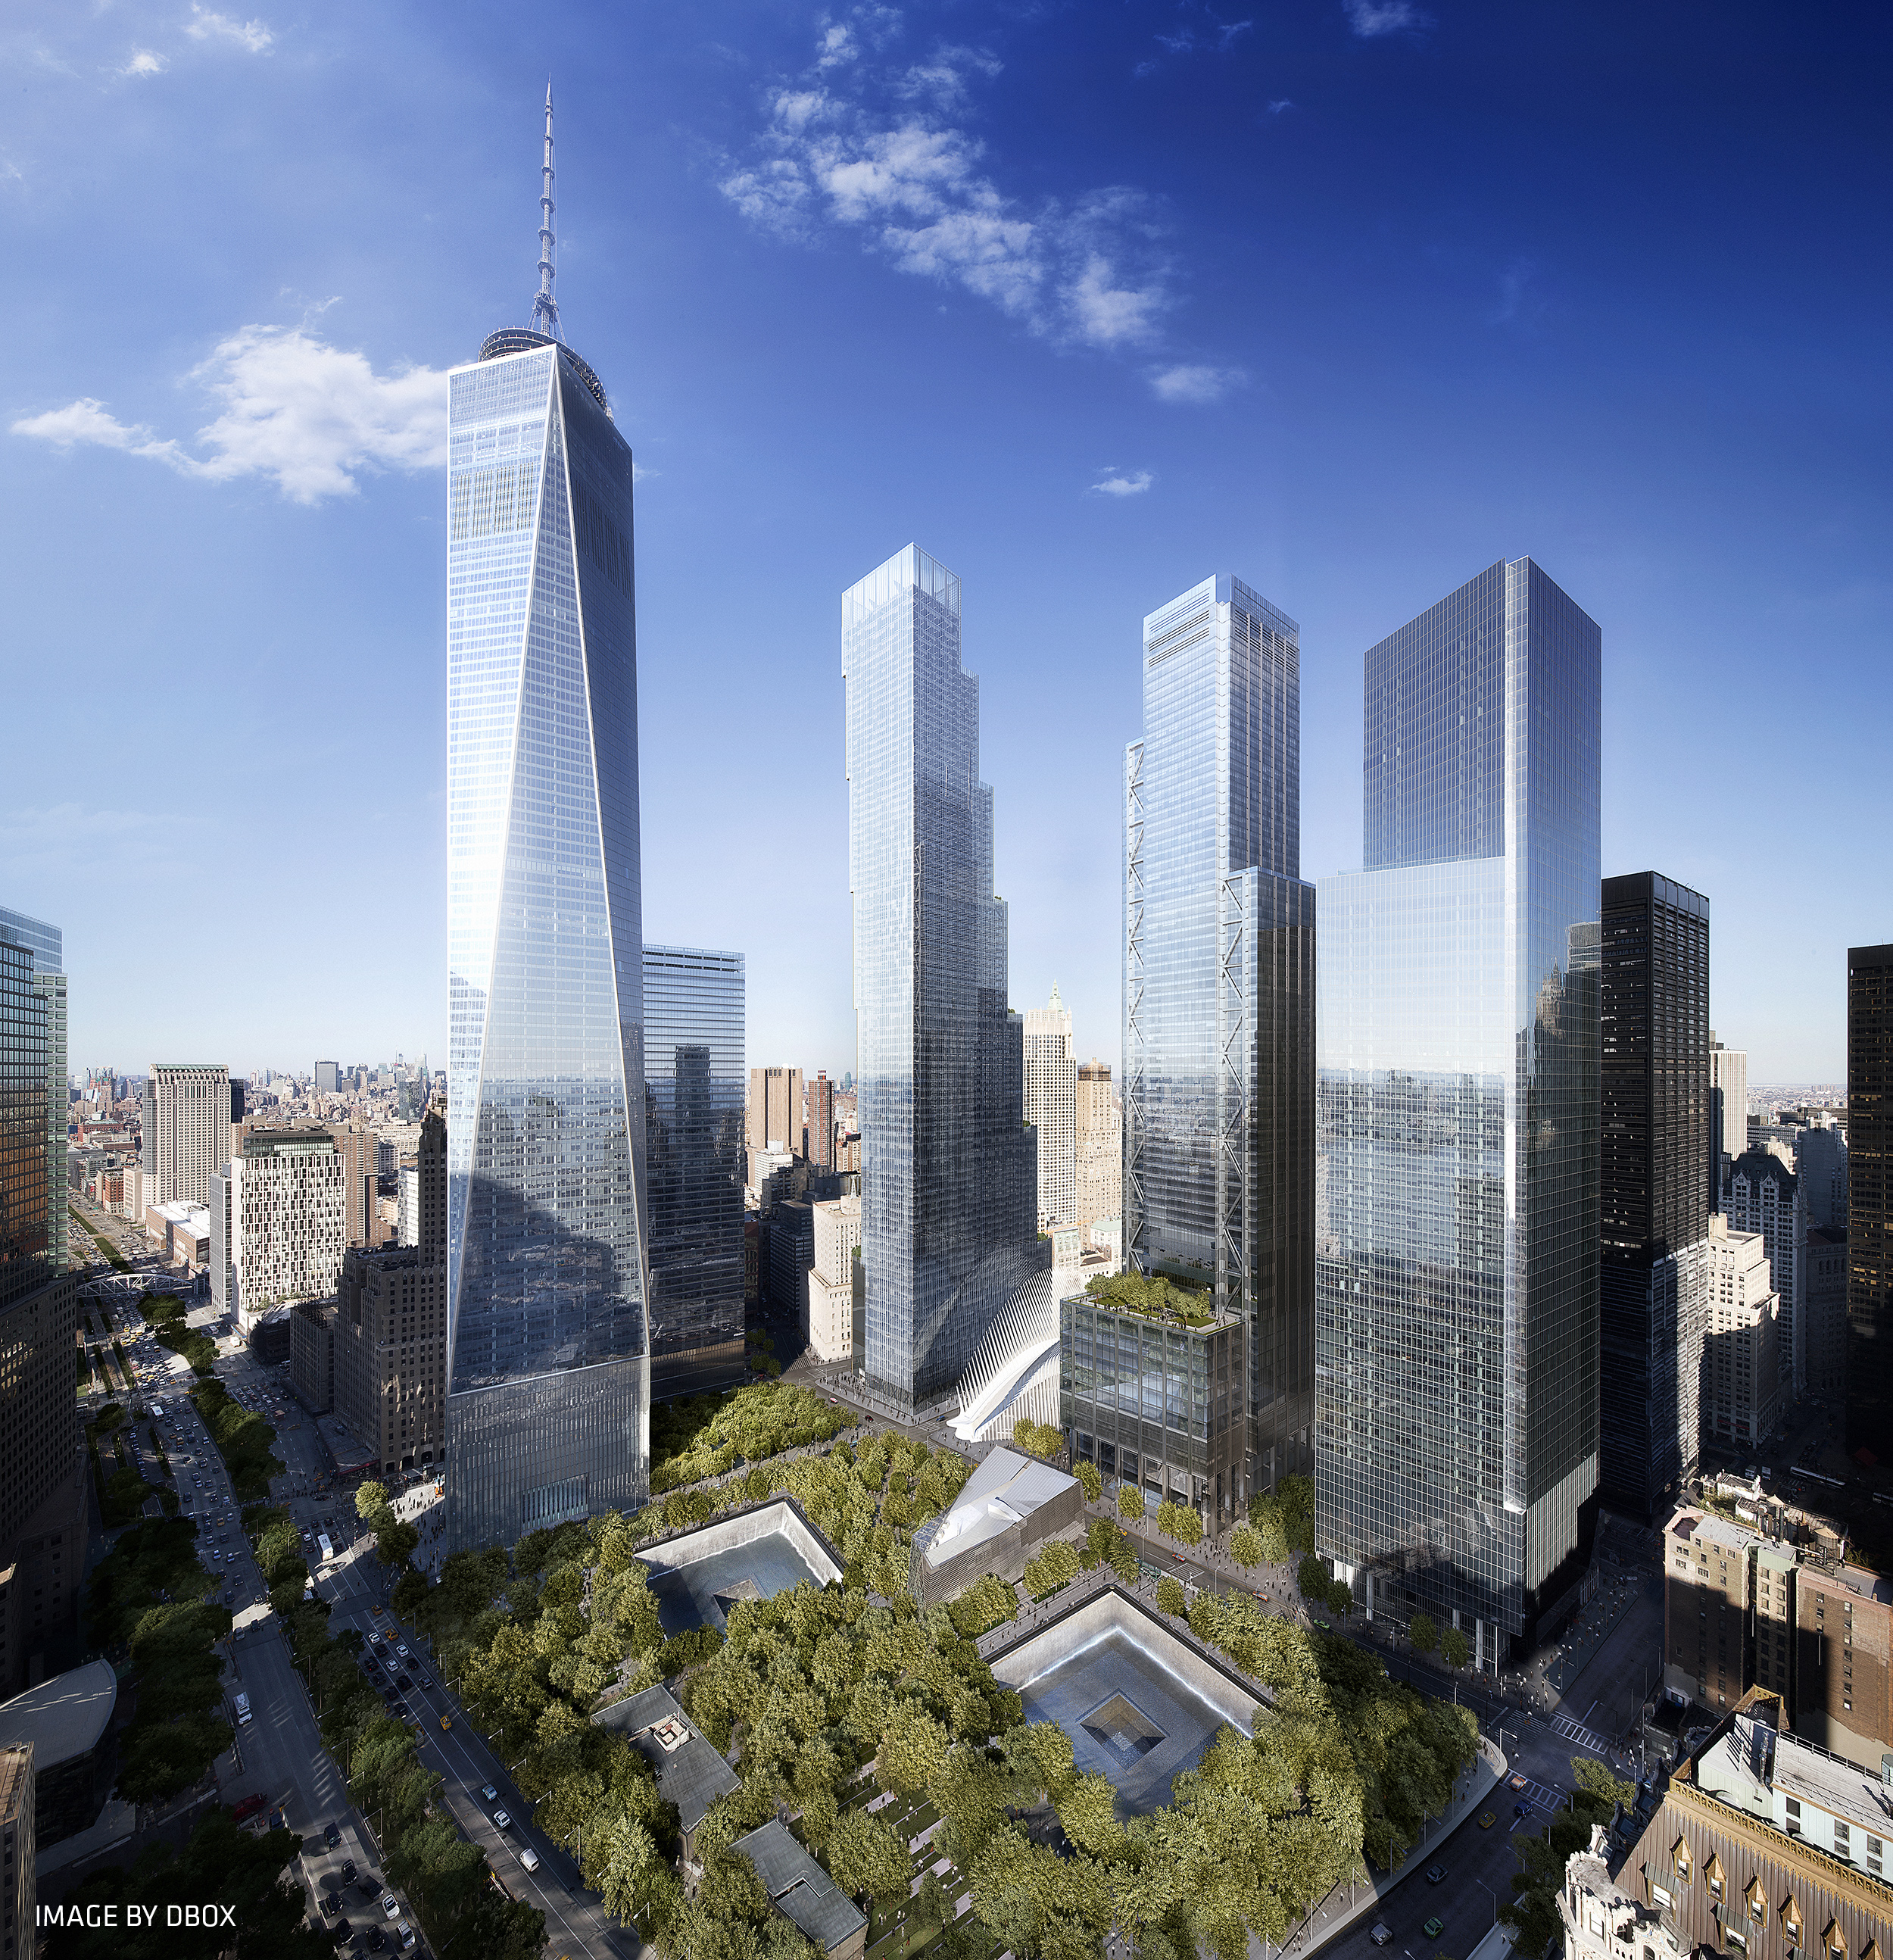 Rendering of the completed office towers of the World Trade Center. Credit: DBOX